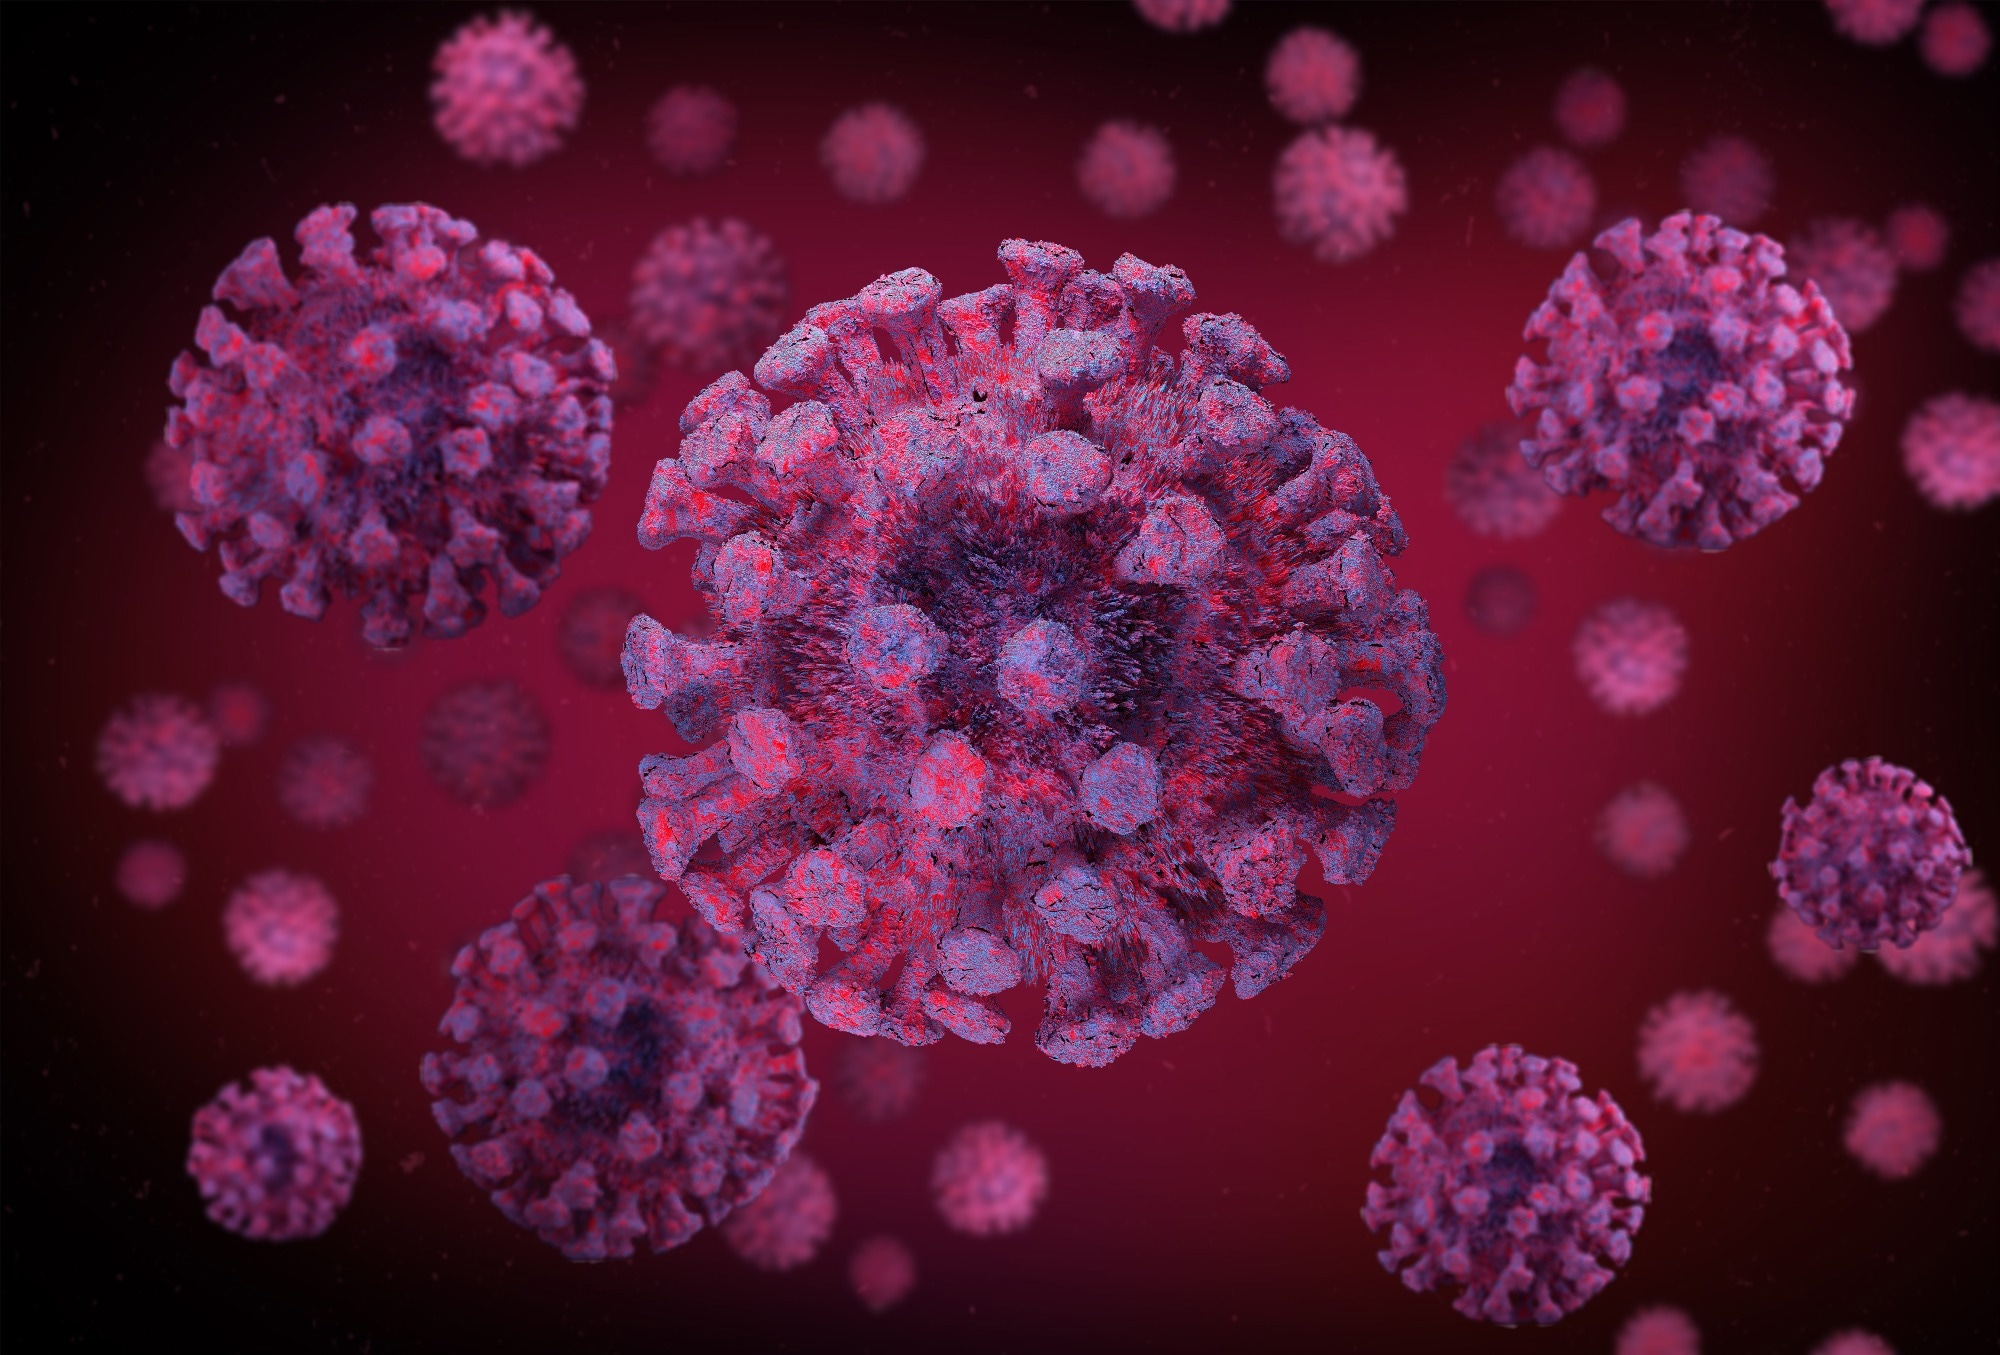 Study: Prolonged T-cell activation and long COVID symptoms independently associate with severe COVID-19 at 3 months. Image Credit: iunewind / Shutterstock.com